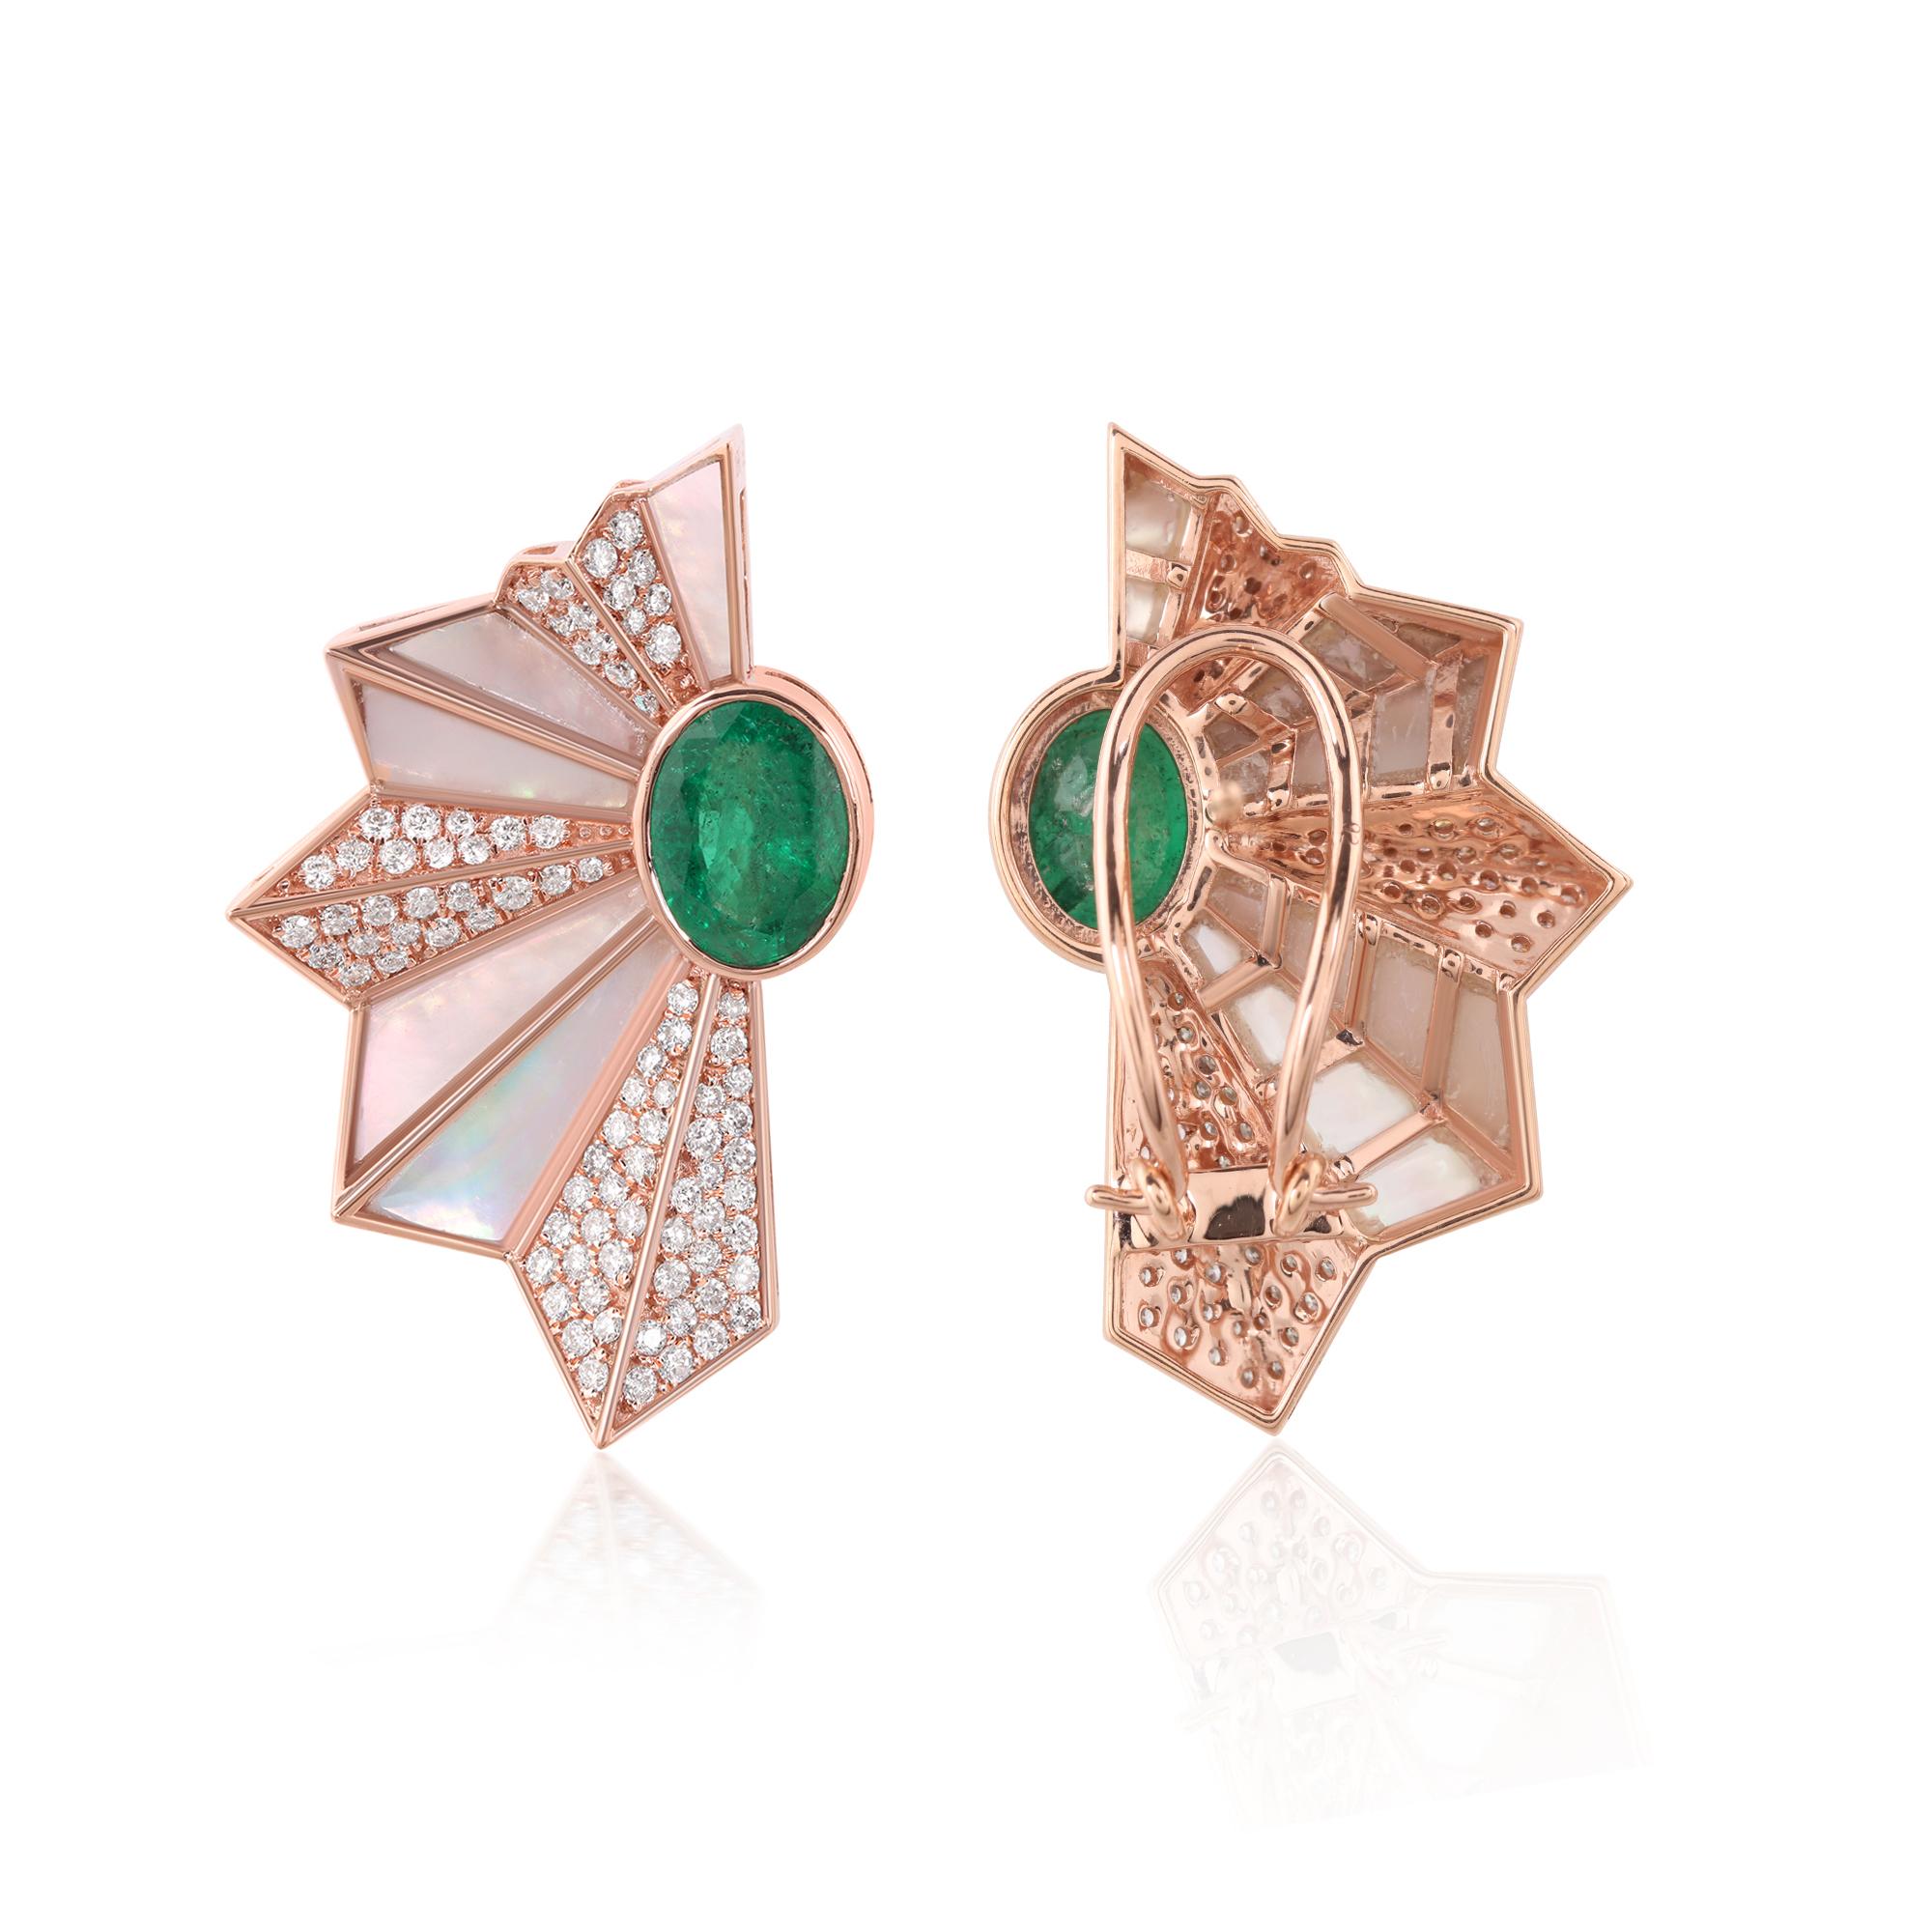 The focal point of these earrings is the magnificent Zambian Emeralds, renowned for their rich green hue and unparalleled beauty. These natural gems are meticulously selected for their exceptional quality, ensuring each earring exudes a mesmerizing